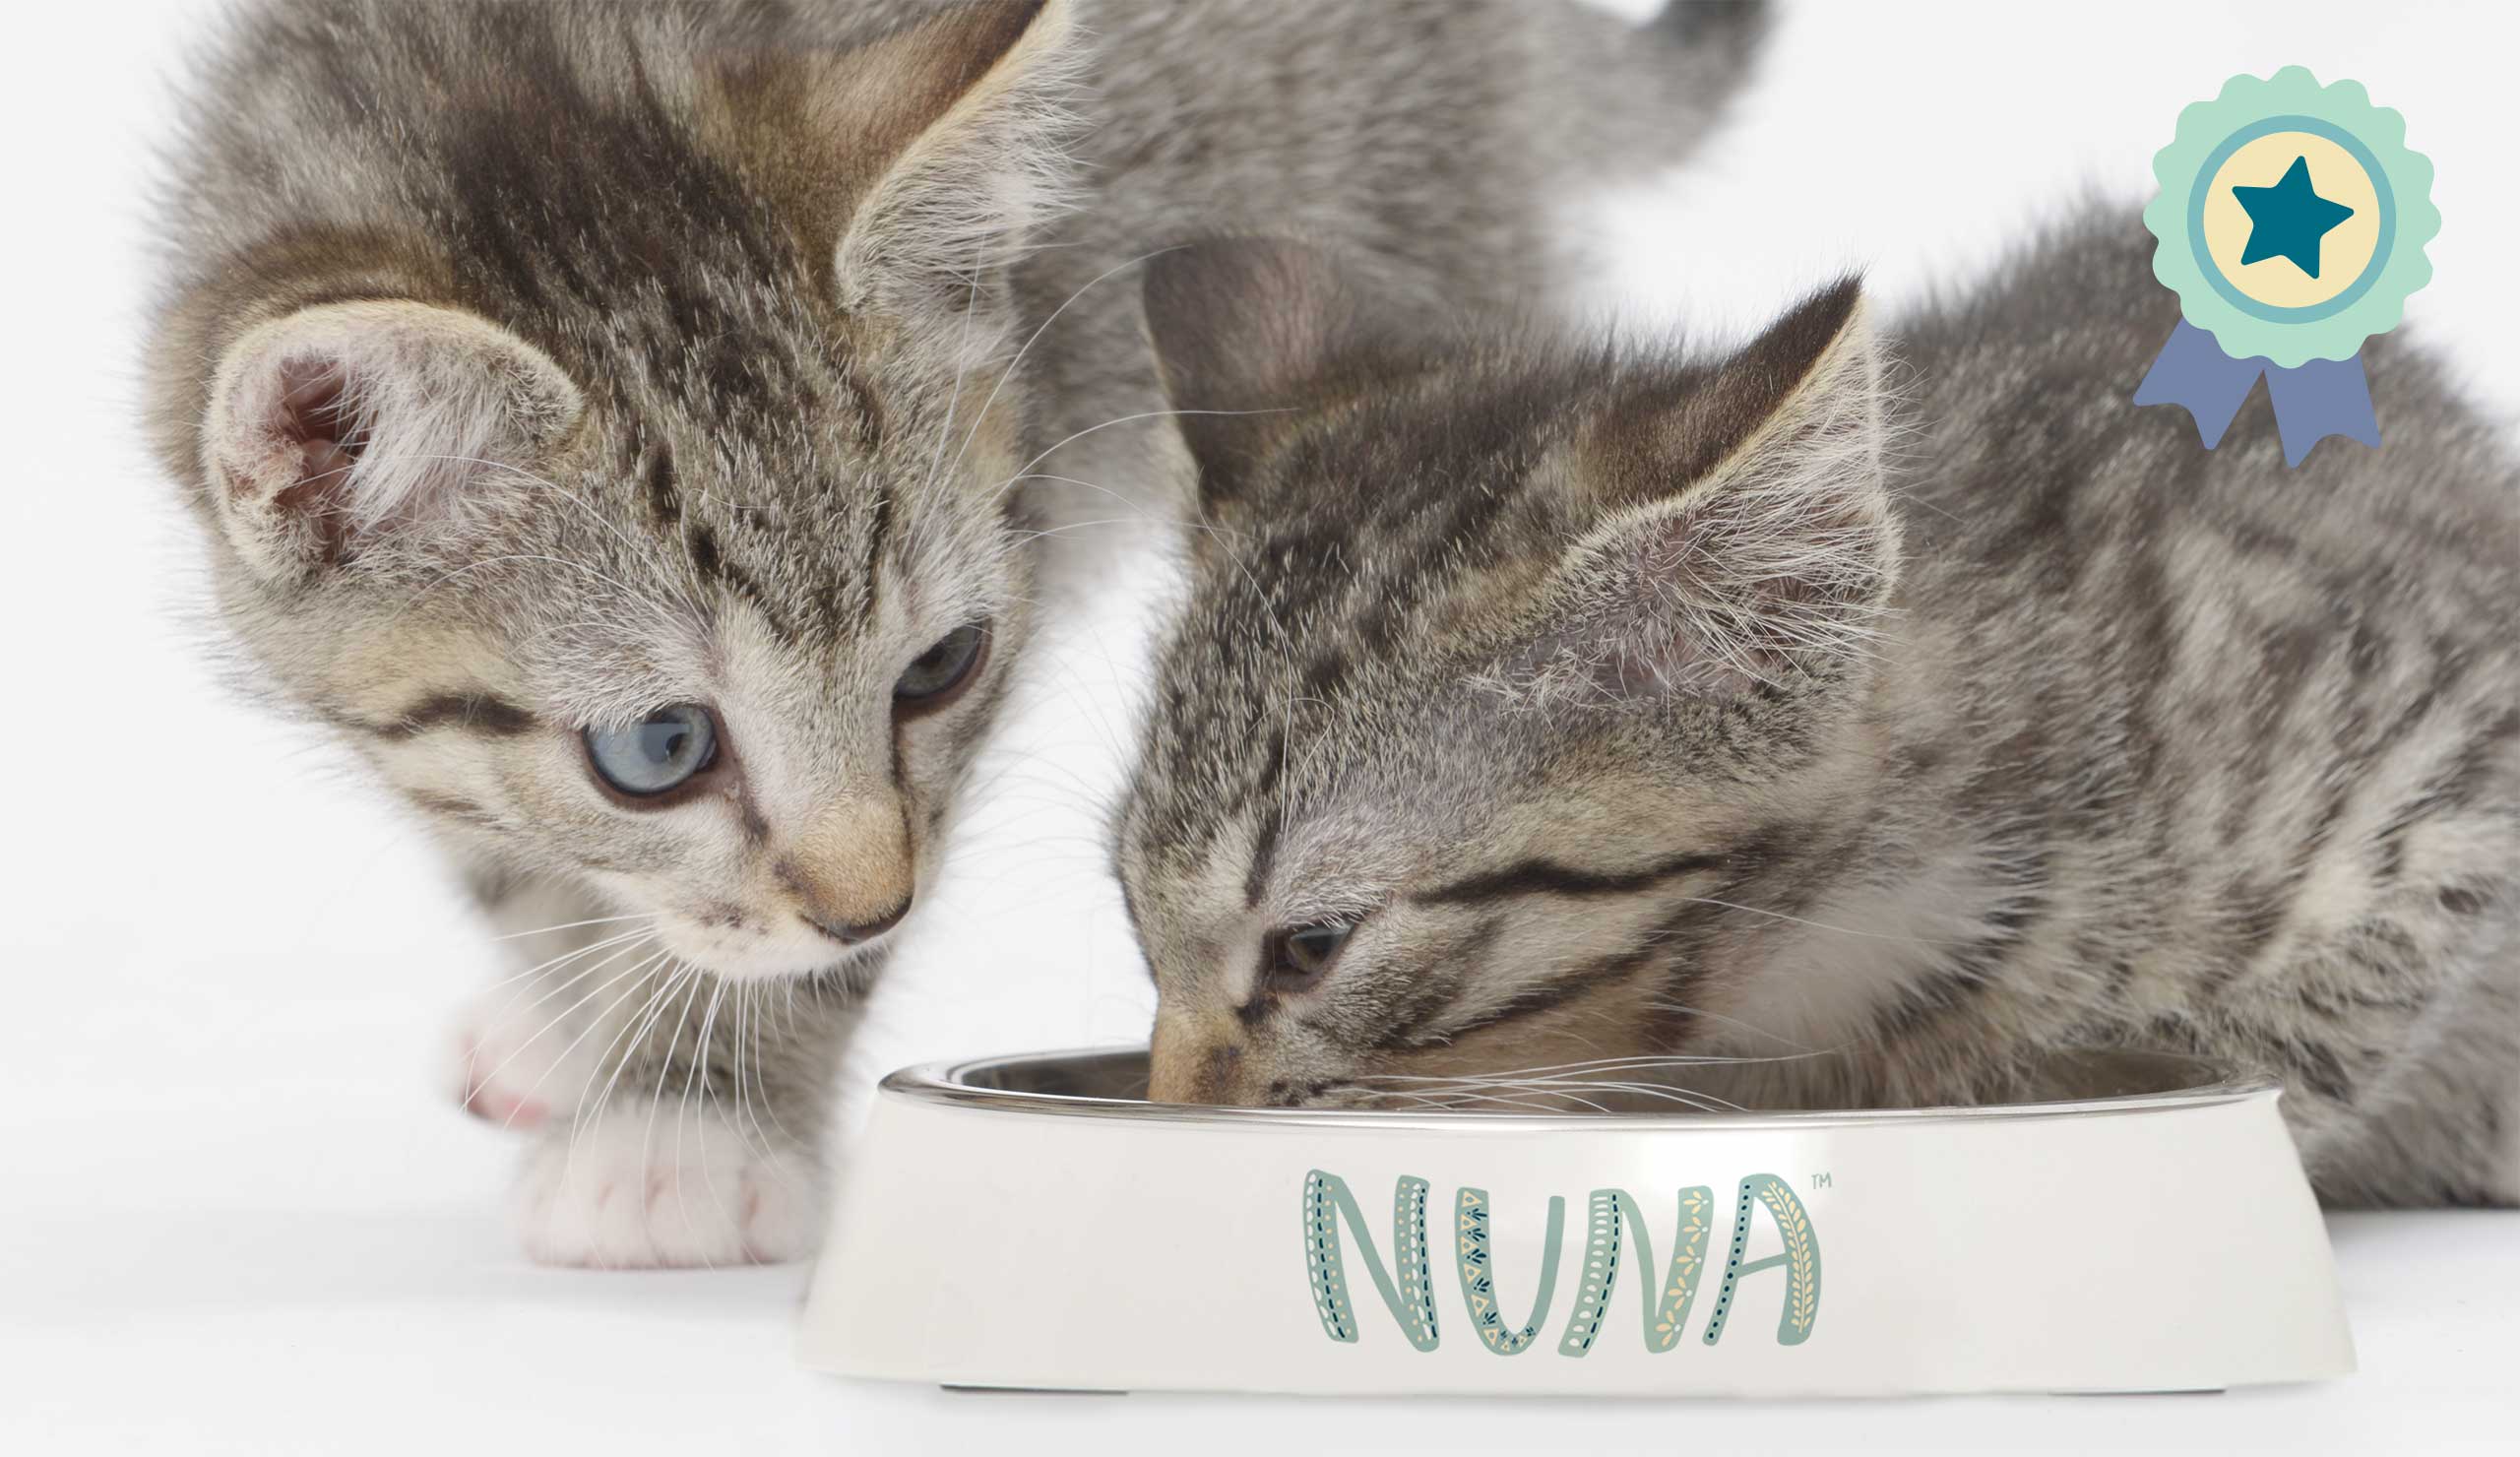 Nuna recipes are a taste test winner according to our jury of taster cats